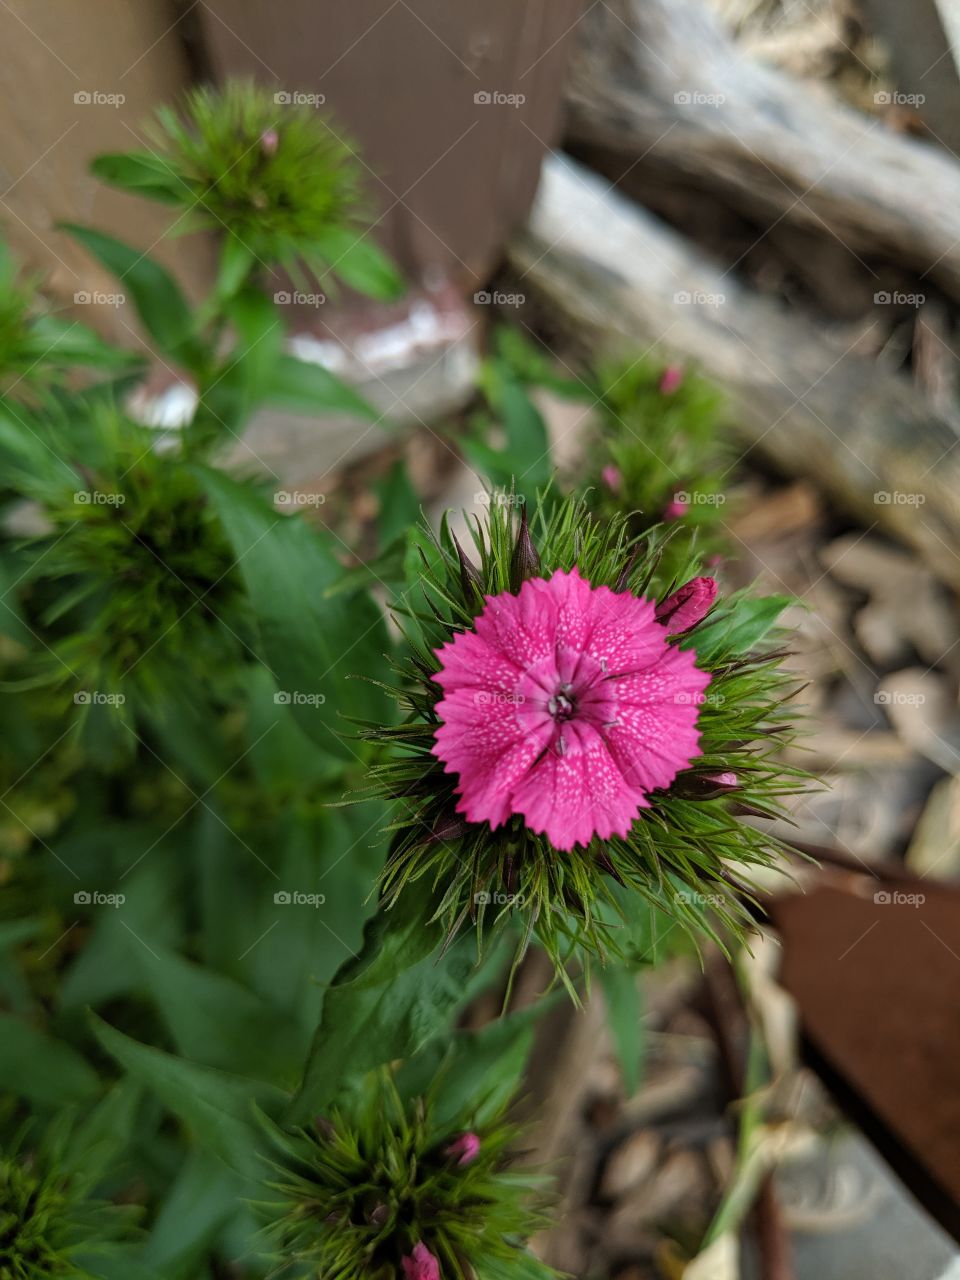 Pretty in pink and first flower to show.